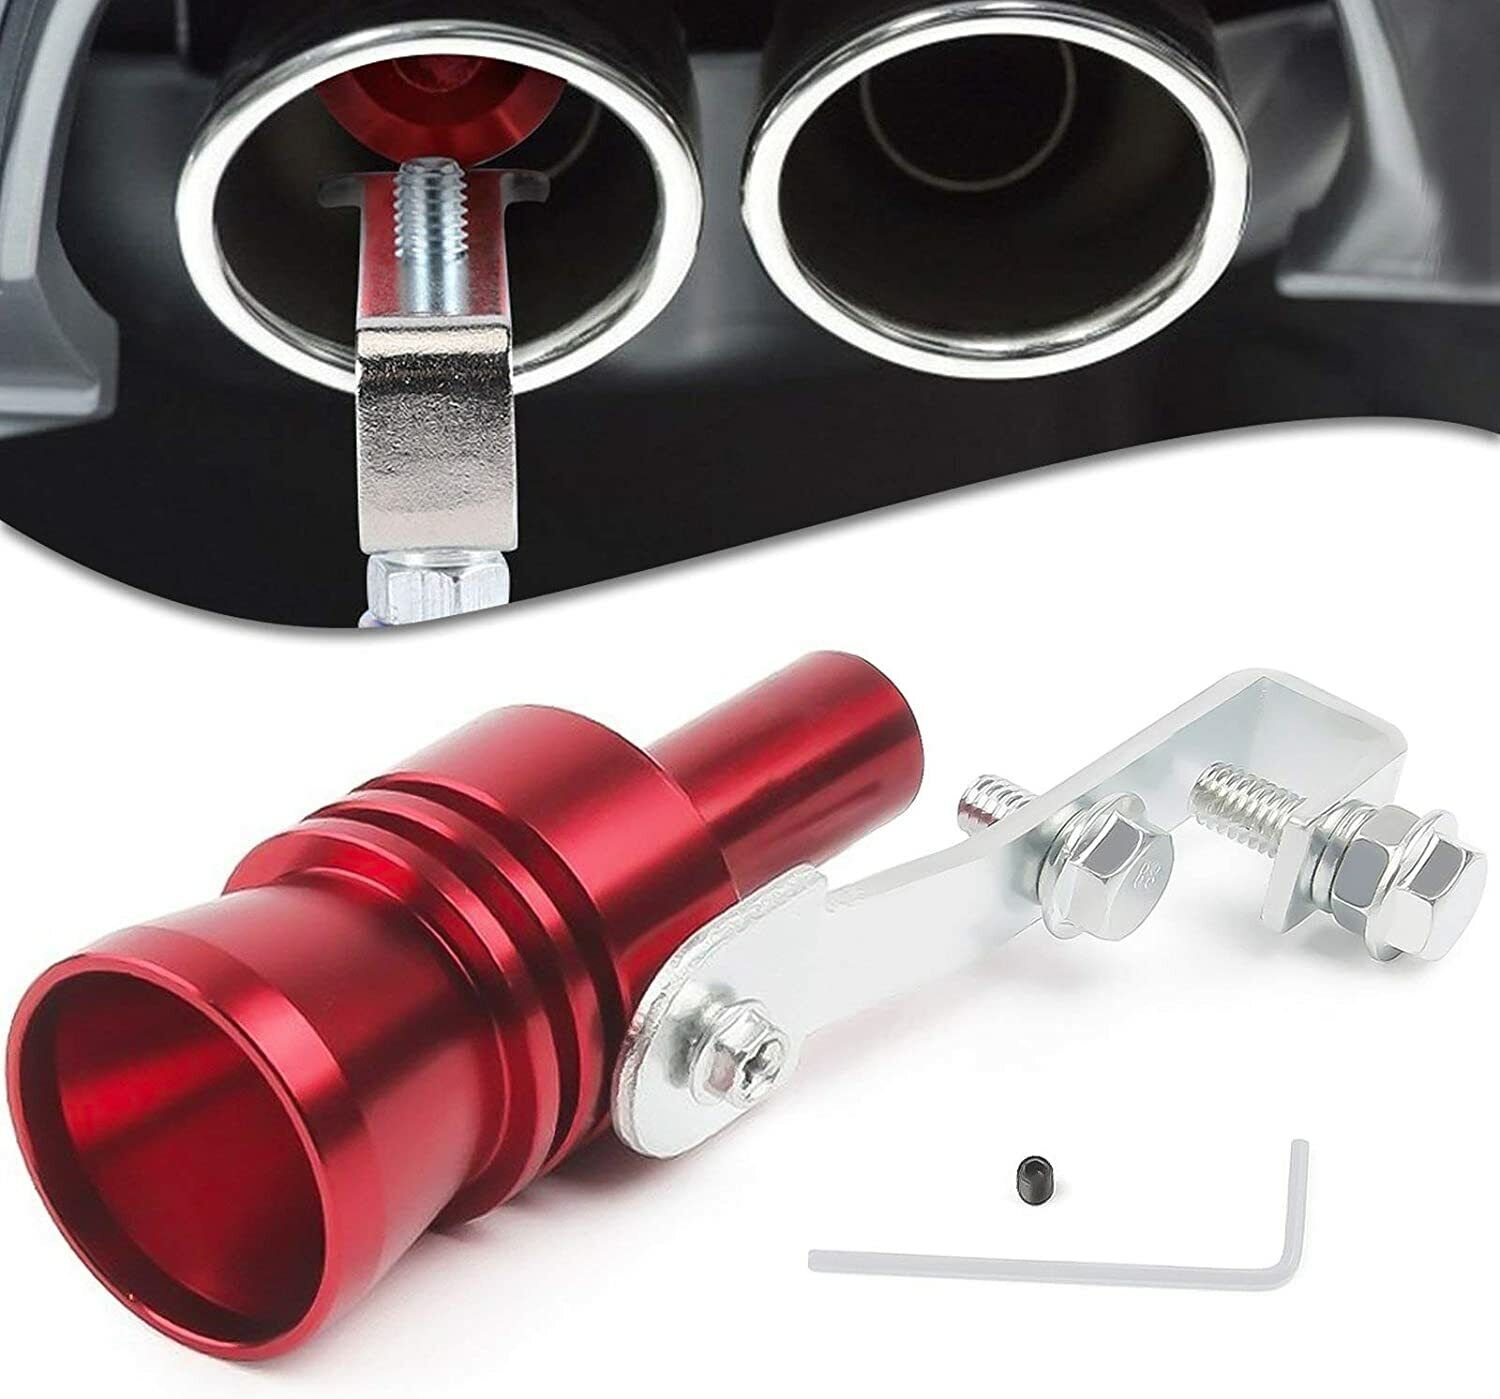 Universal Aluminum Simulator Whistler Exhaust Turbo Whistle Pipe Sound  Muffler Blow Off Car Styling Tunning L 2pcs Black